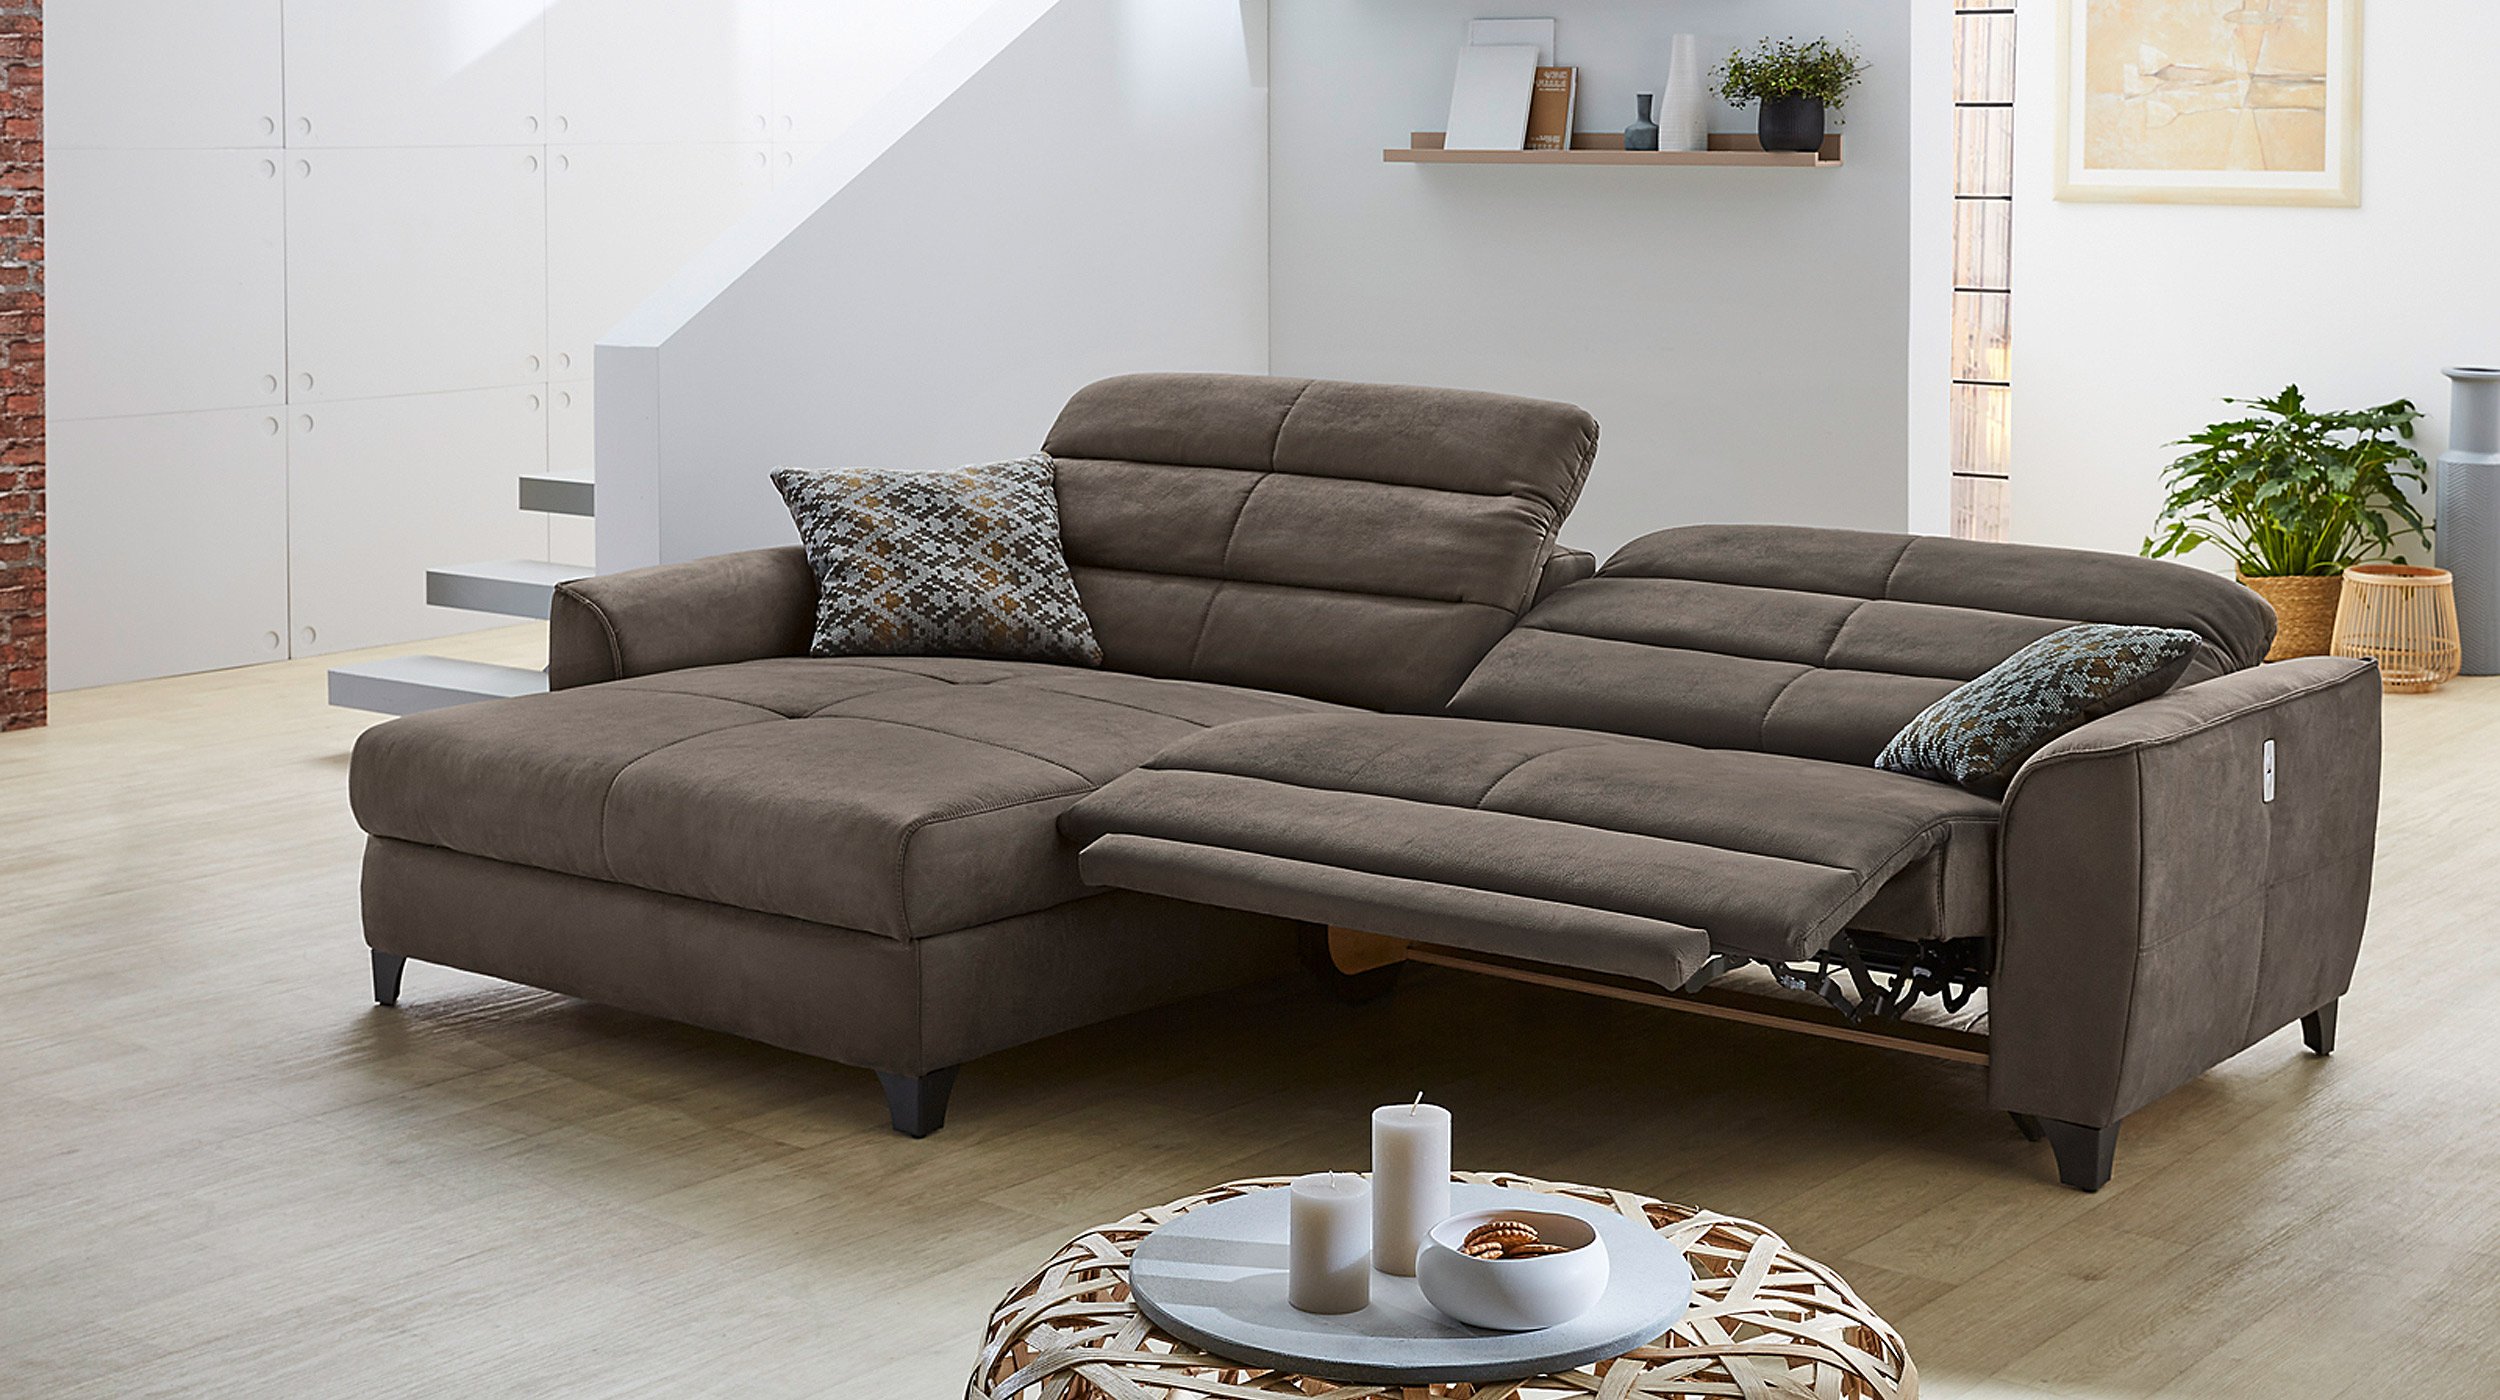 Ecksofa mit Relaxfunktion braun 289 x 184 cm - DOUBLE-ONE